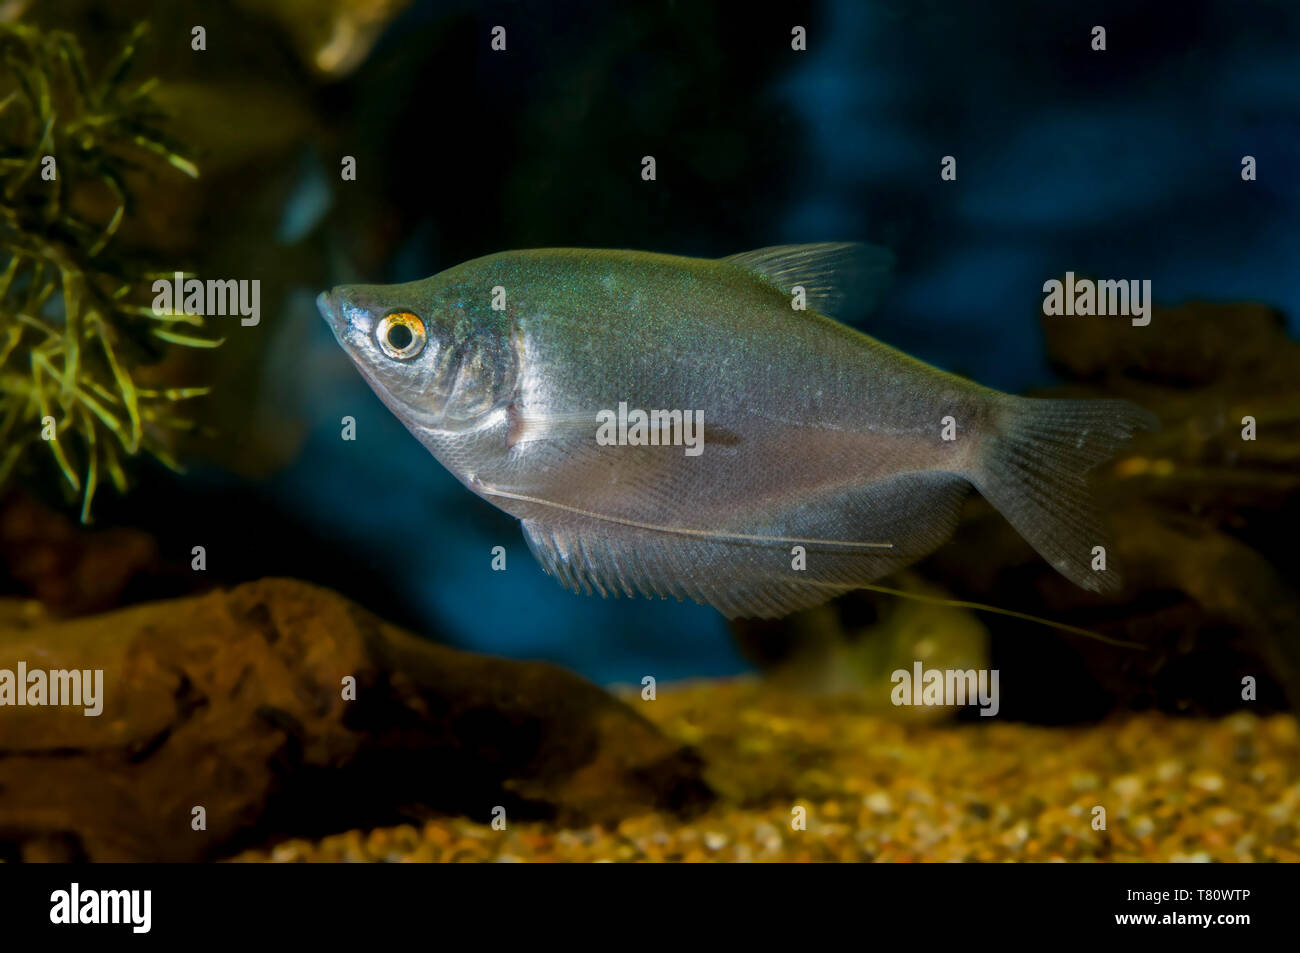 Minnesota. Aquarium fish. Moonlight gourami (Trichogaster microlepis) is a labyrinth fish of the family Osphronemidae. It may also be called the moonb Stock Photo